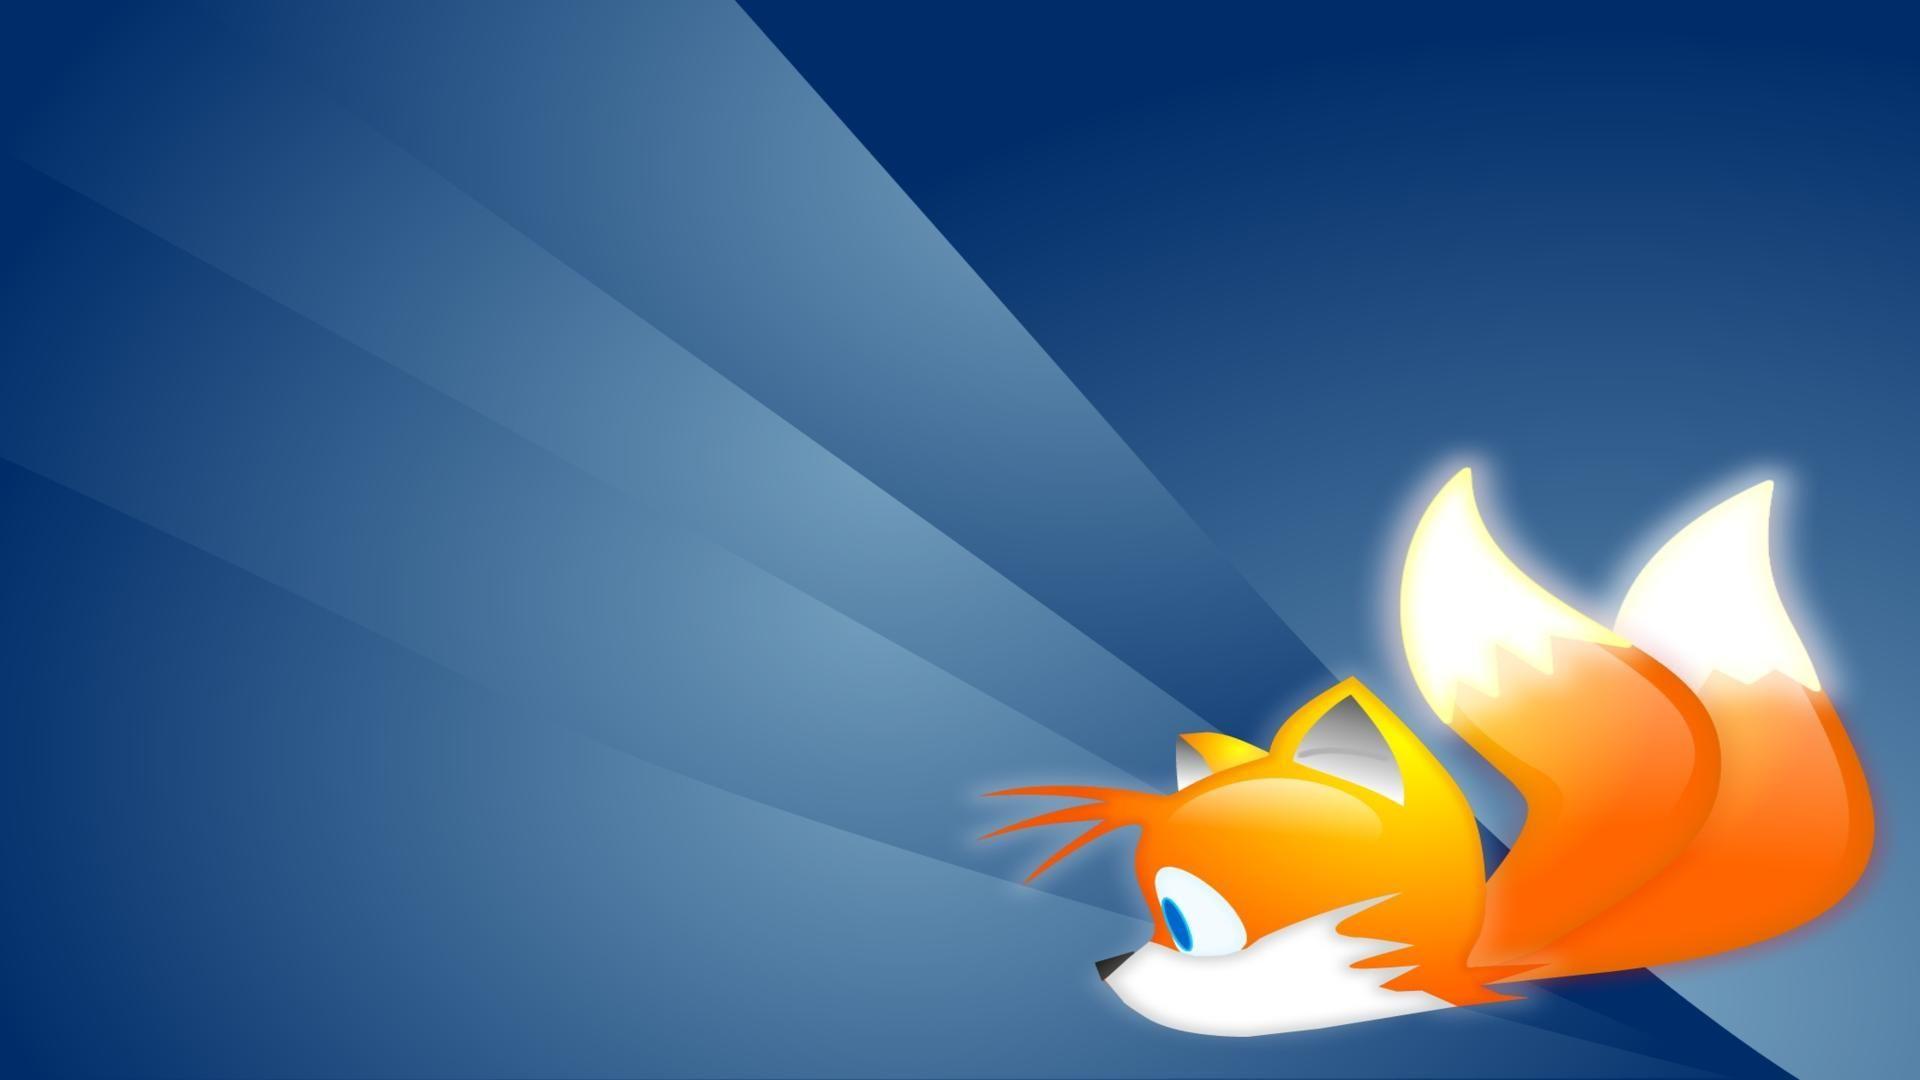 Firefox Browser Background